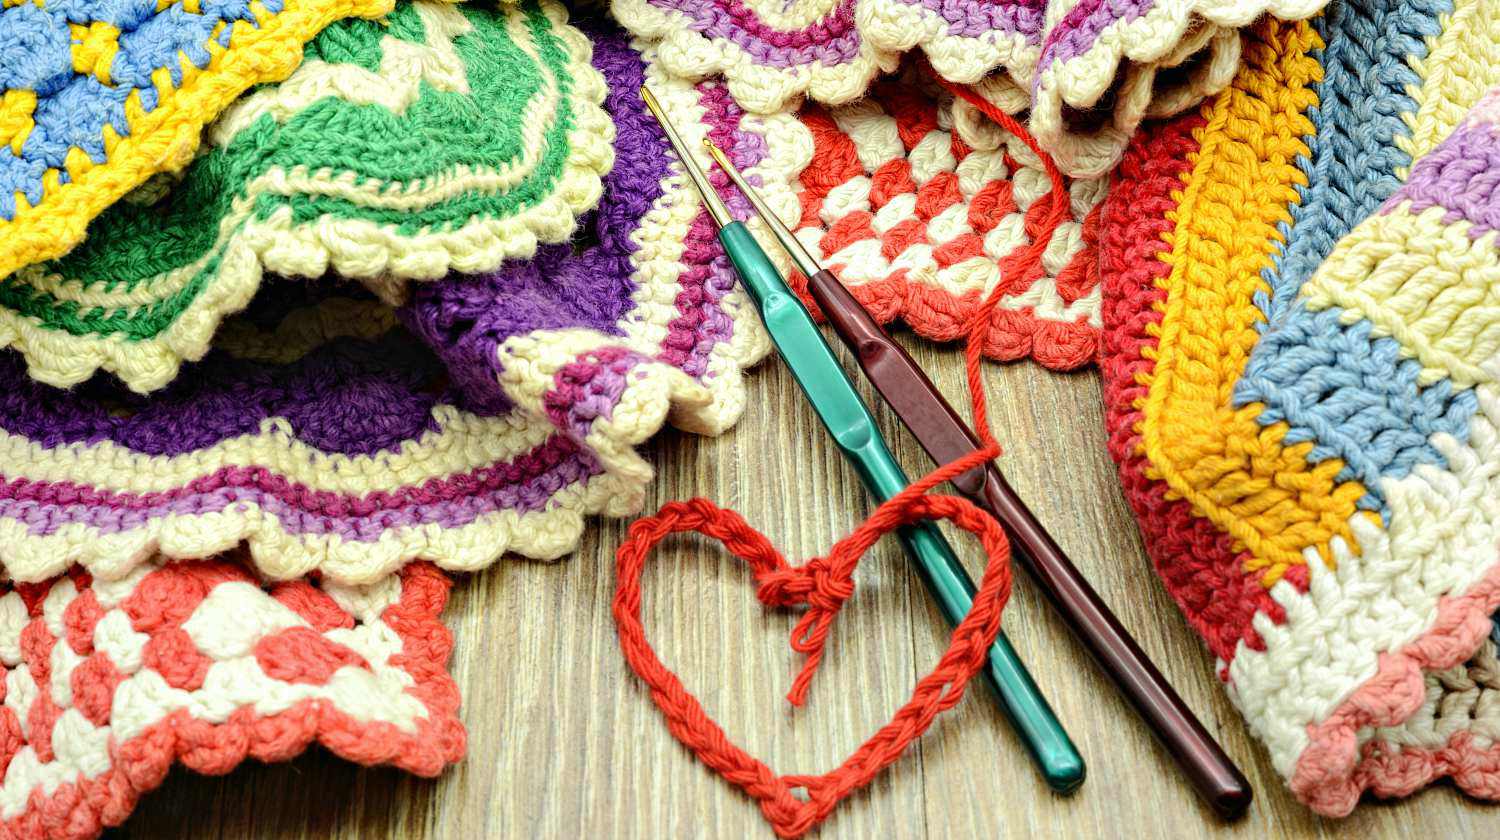 crocheting-colorful-oven-cloth-handmade-love-crocheting-for-beginners-ss-Featured image